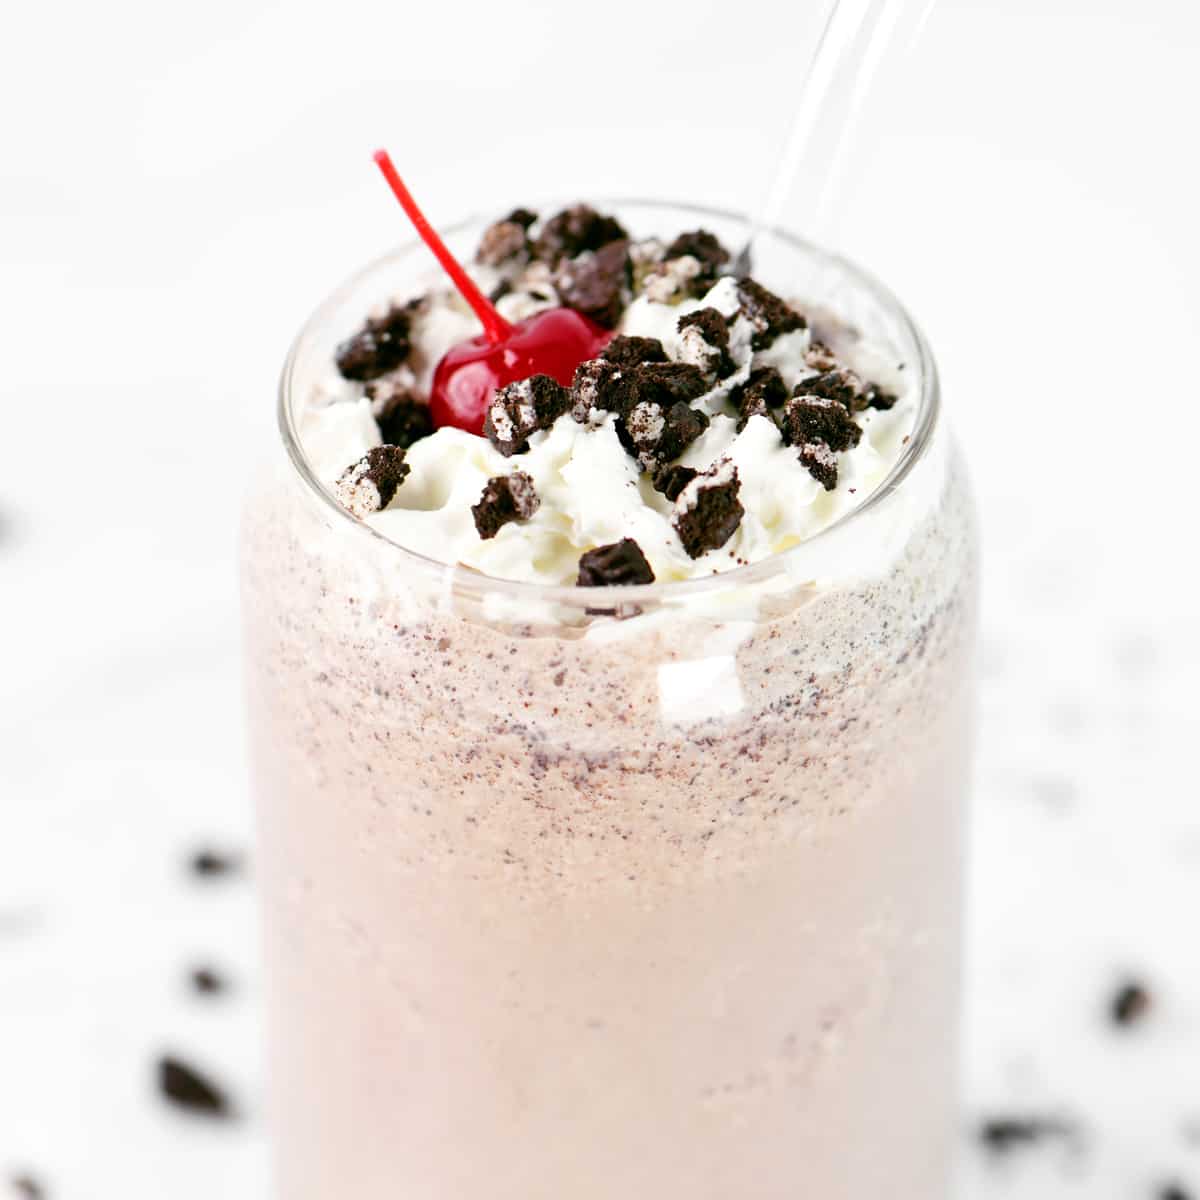 A cherry on top of a cookies and cream milkshake.